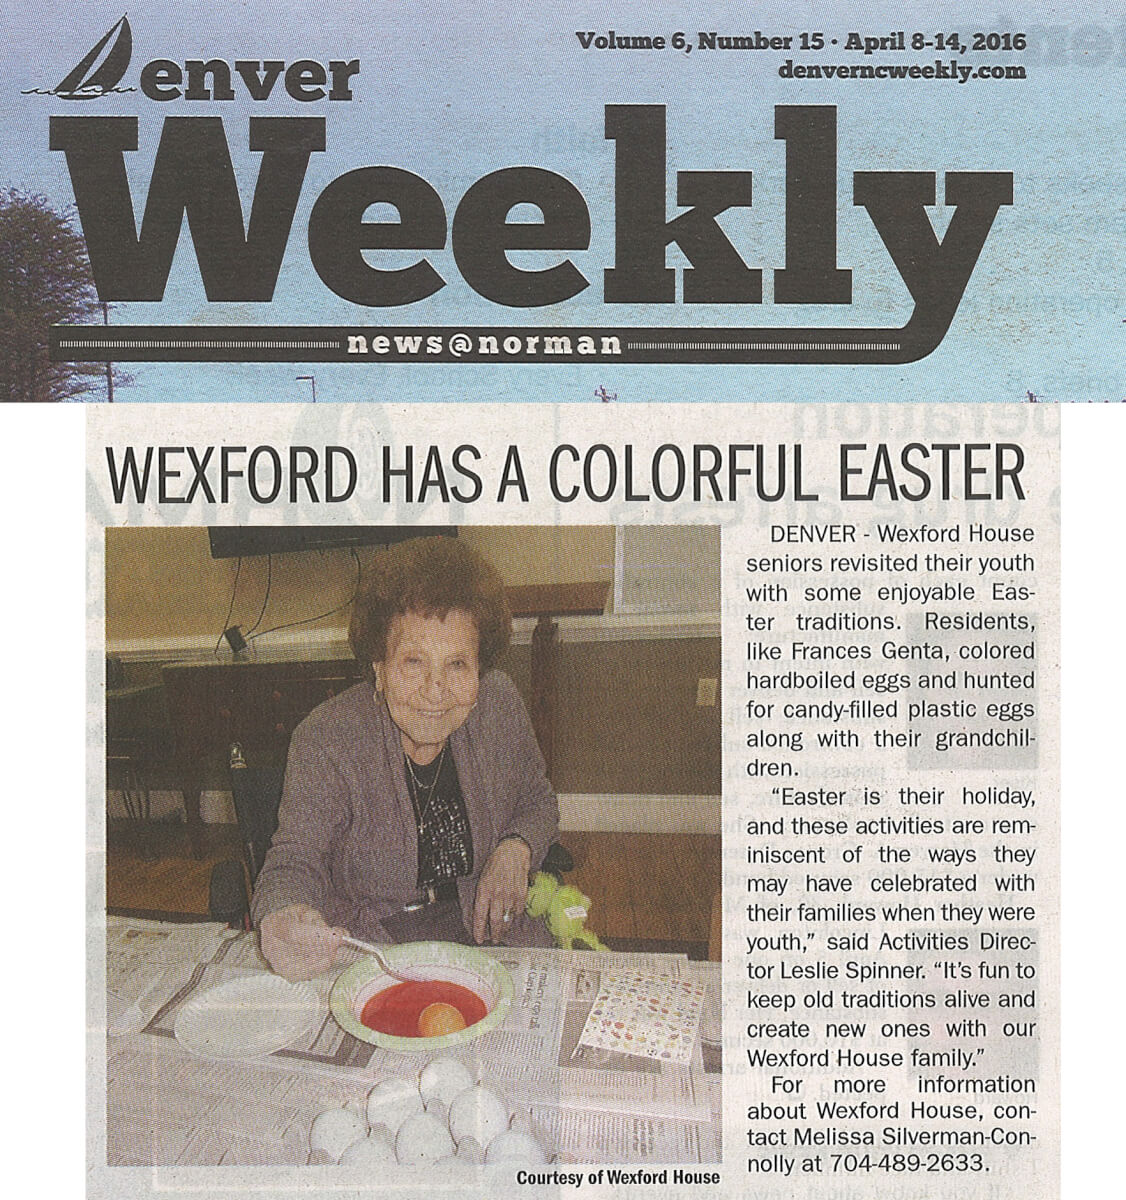 Wexford House celebrates Easter April 2016 story in the Denver Weekly